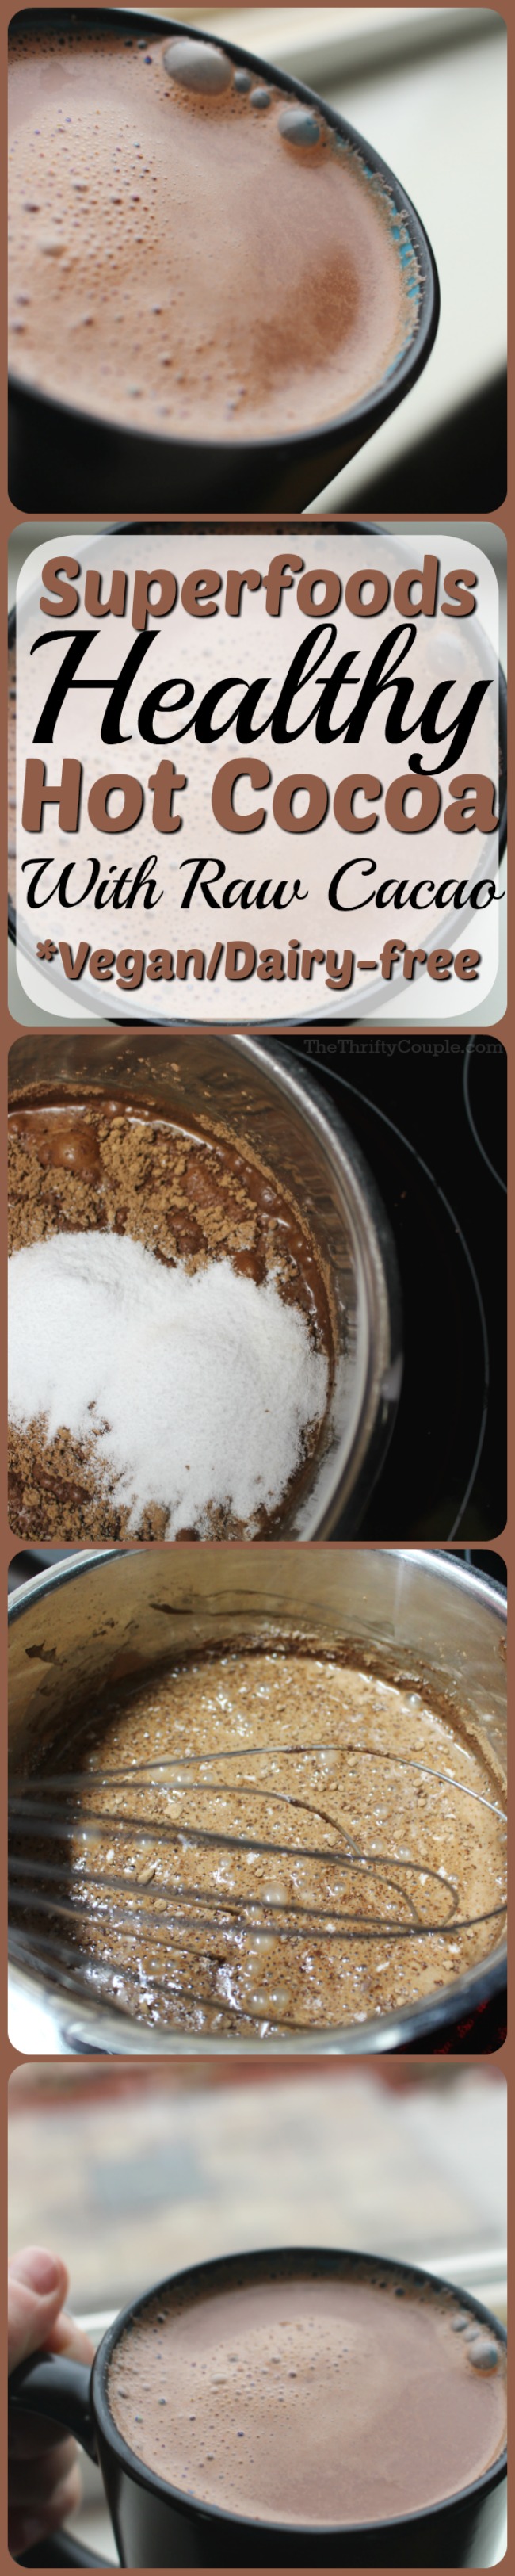 superfoods-healthy-hot-cocoa-with-raw-cacao